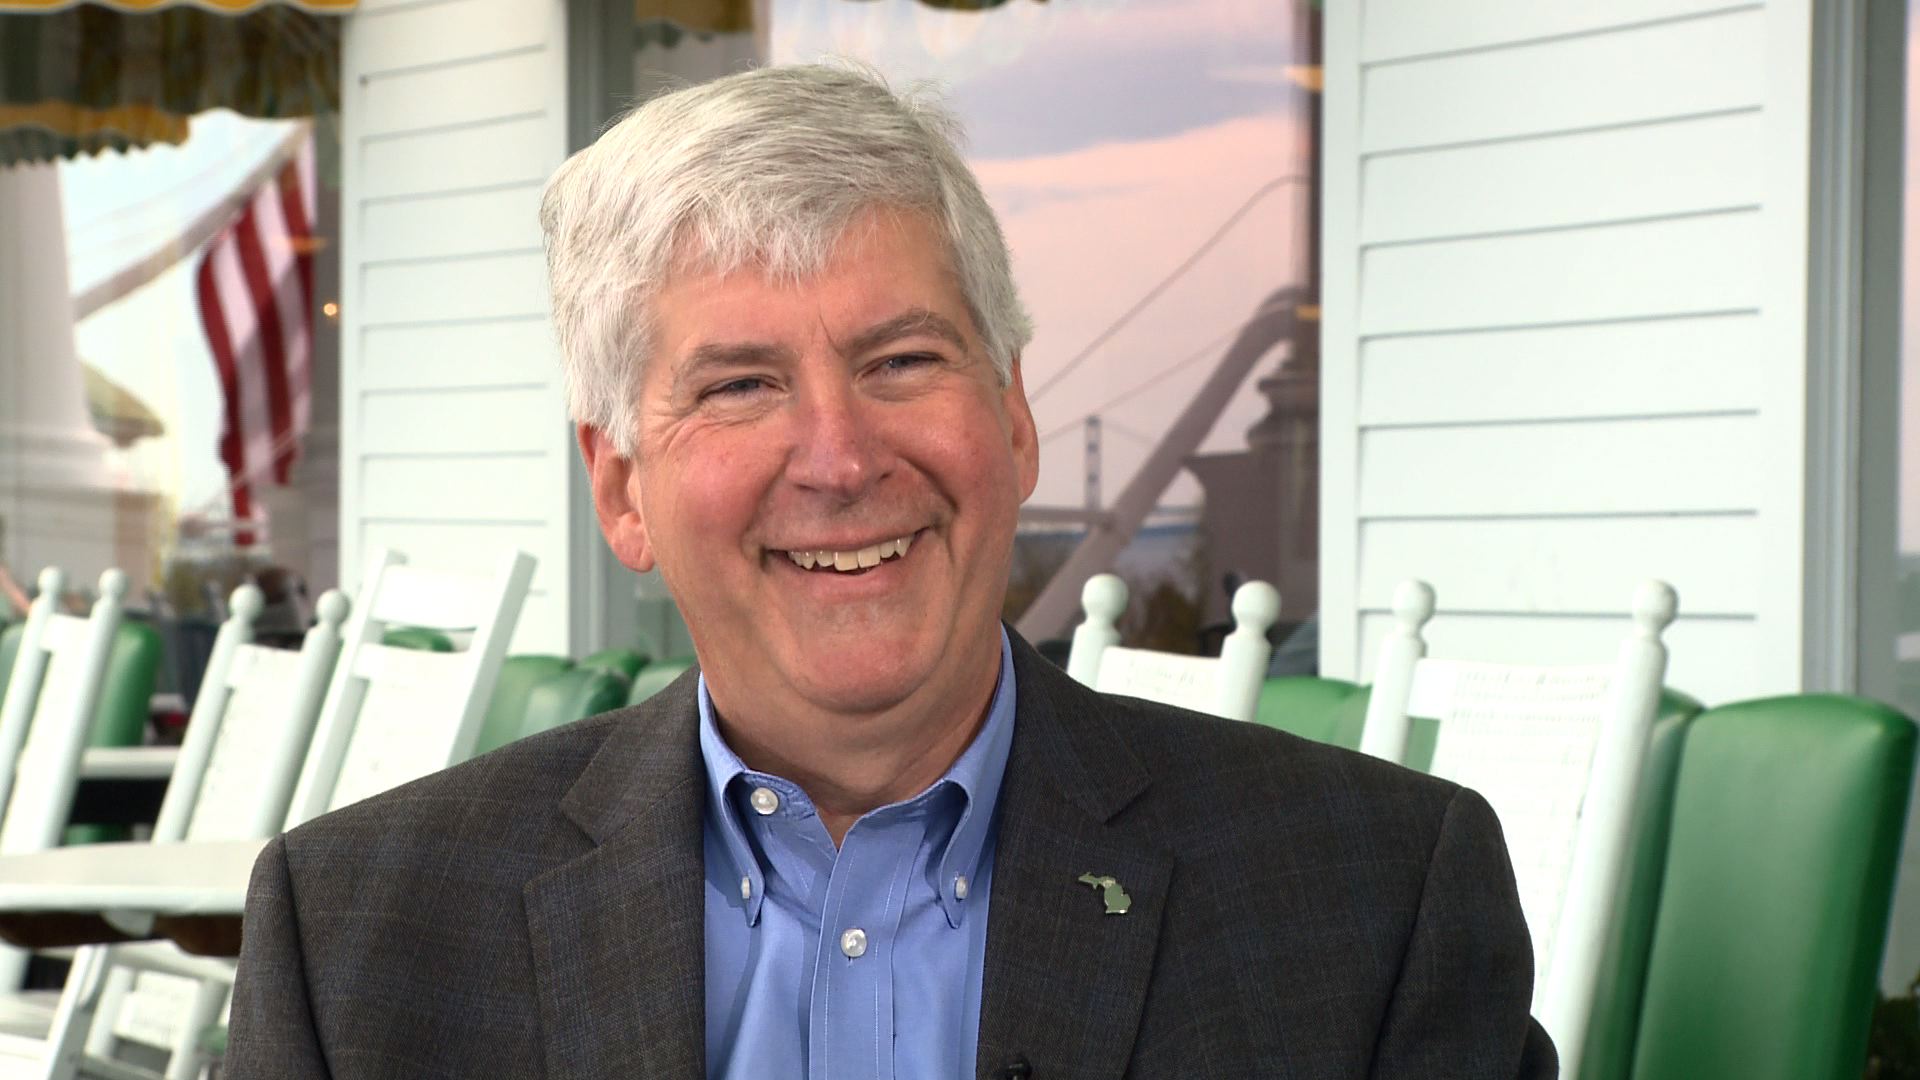 Gov. Rick Snyder is seeking re-election this fall. The first term leader is talking up his track record and improving economic conditions in the state. (credit: Paul Pytlowany/CBS 62)